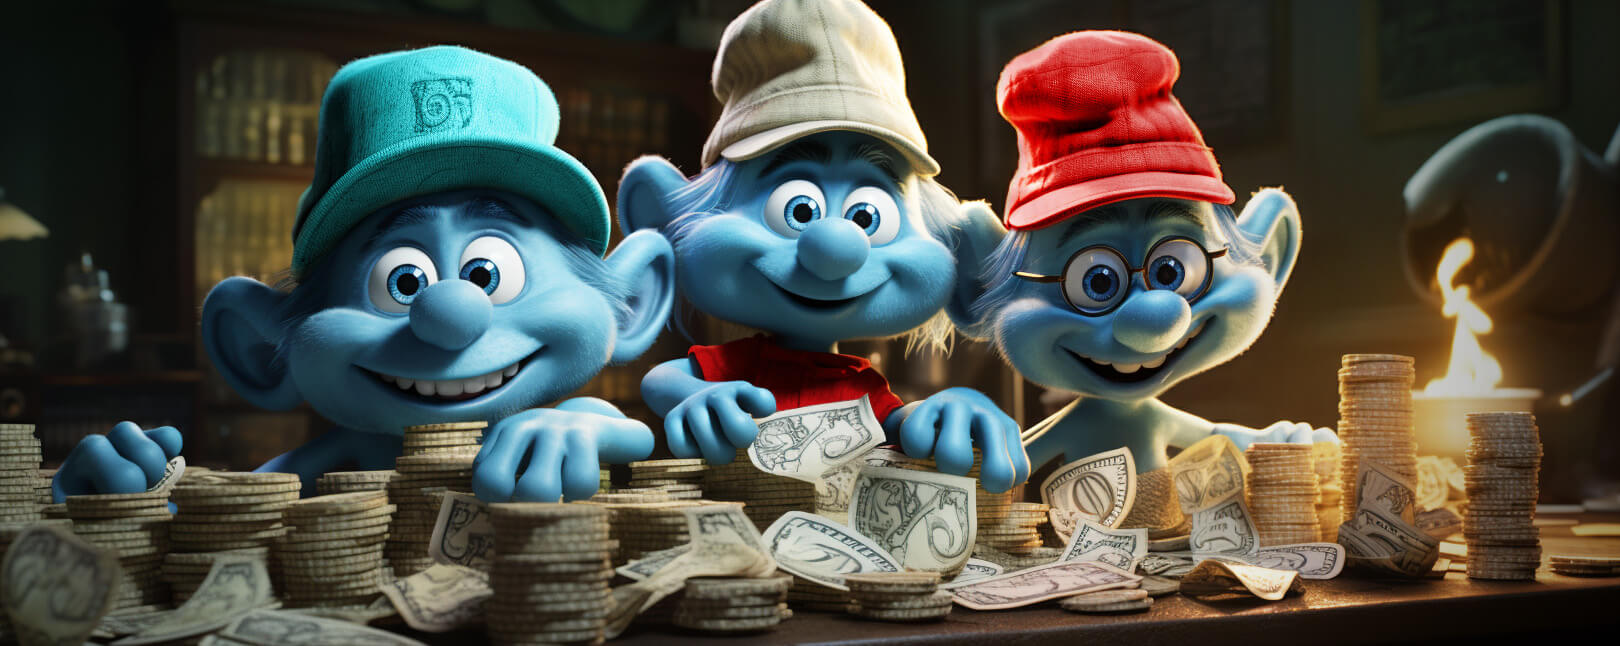 What is Smurfing? Here's How “Micro-Money Laundering” Works